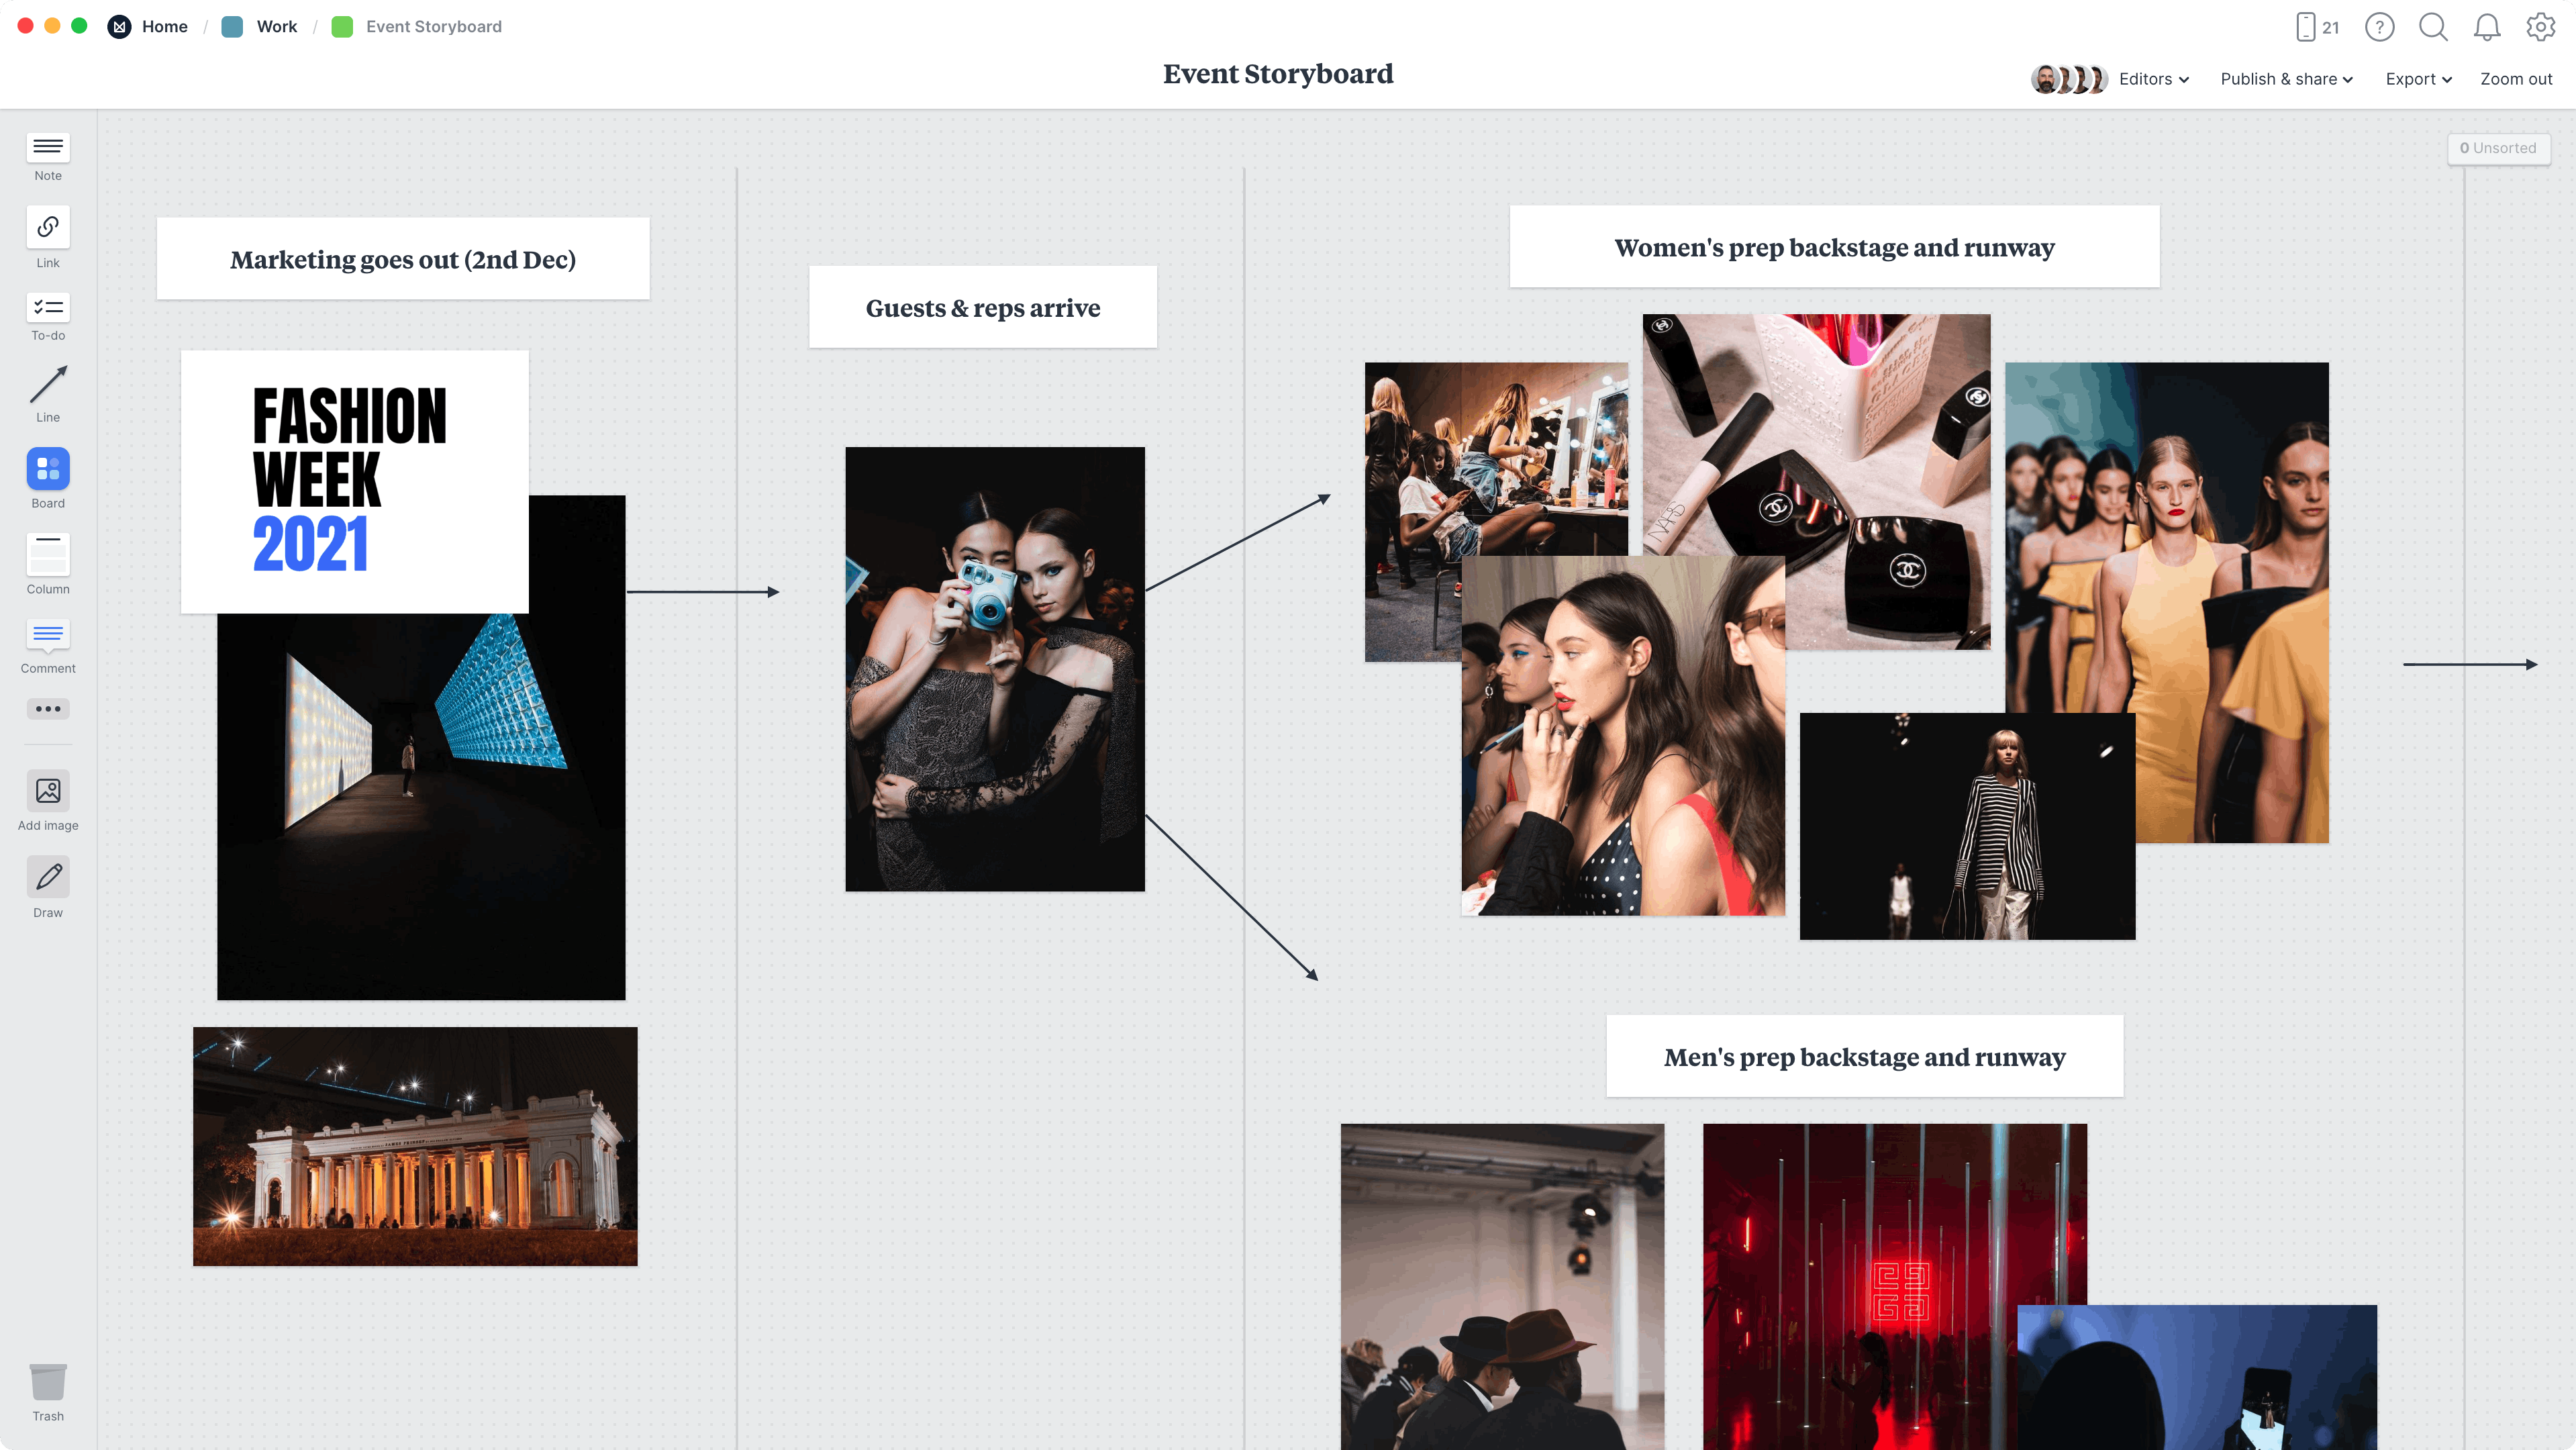 Event Storyboard Template, within the Milanote app